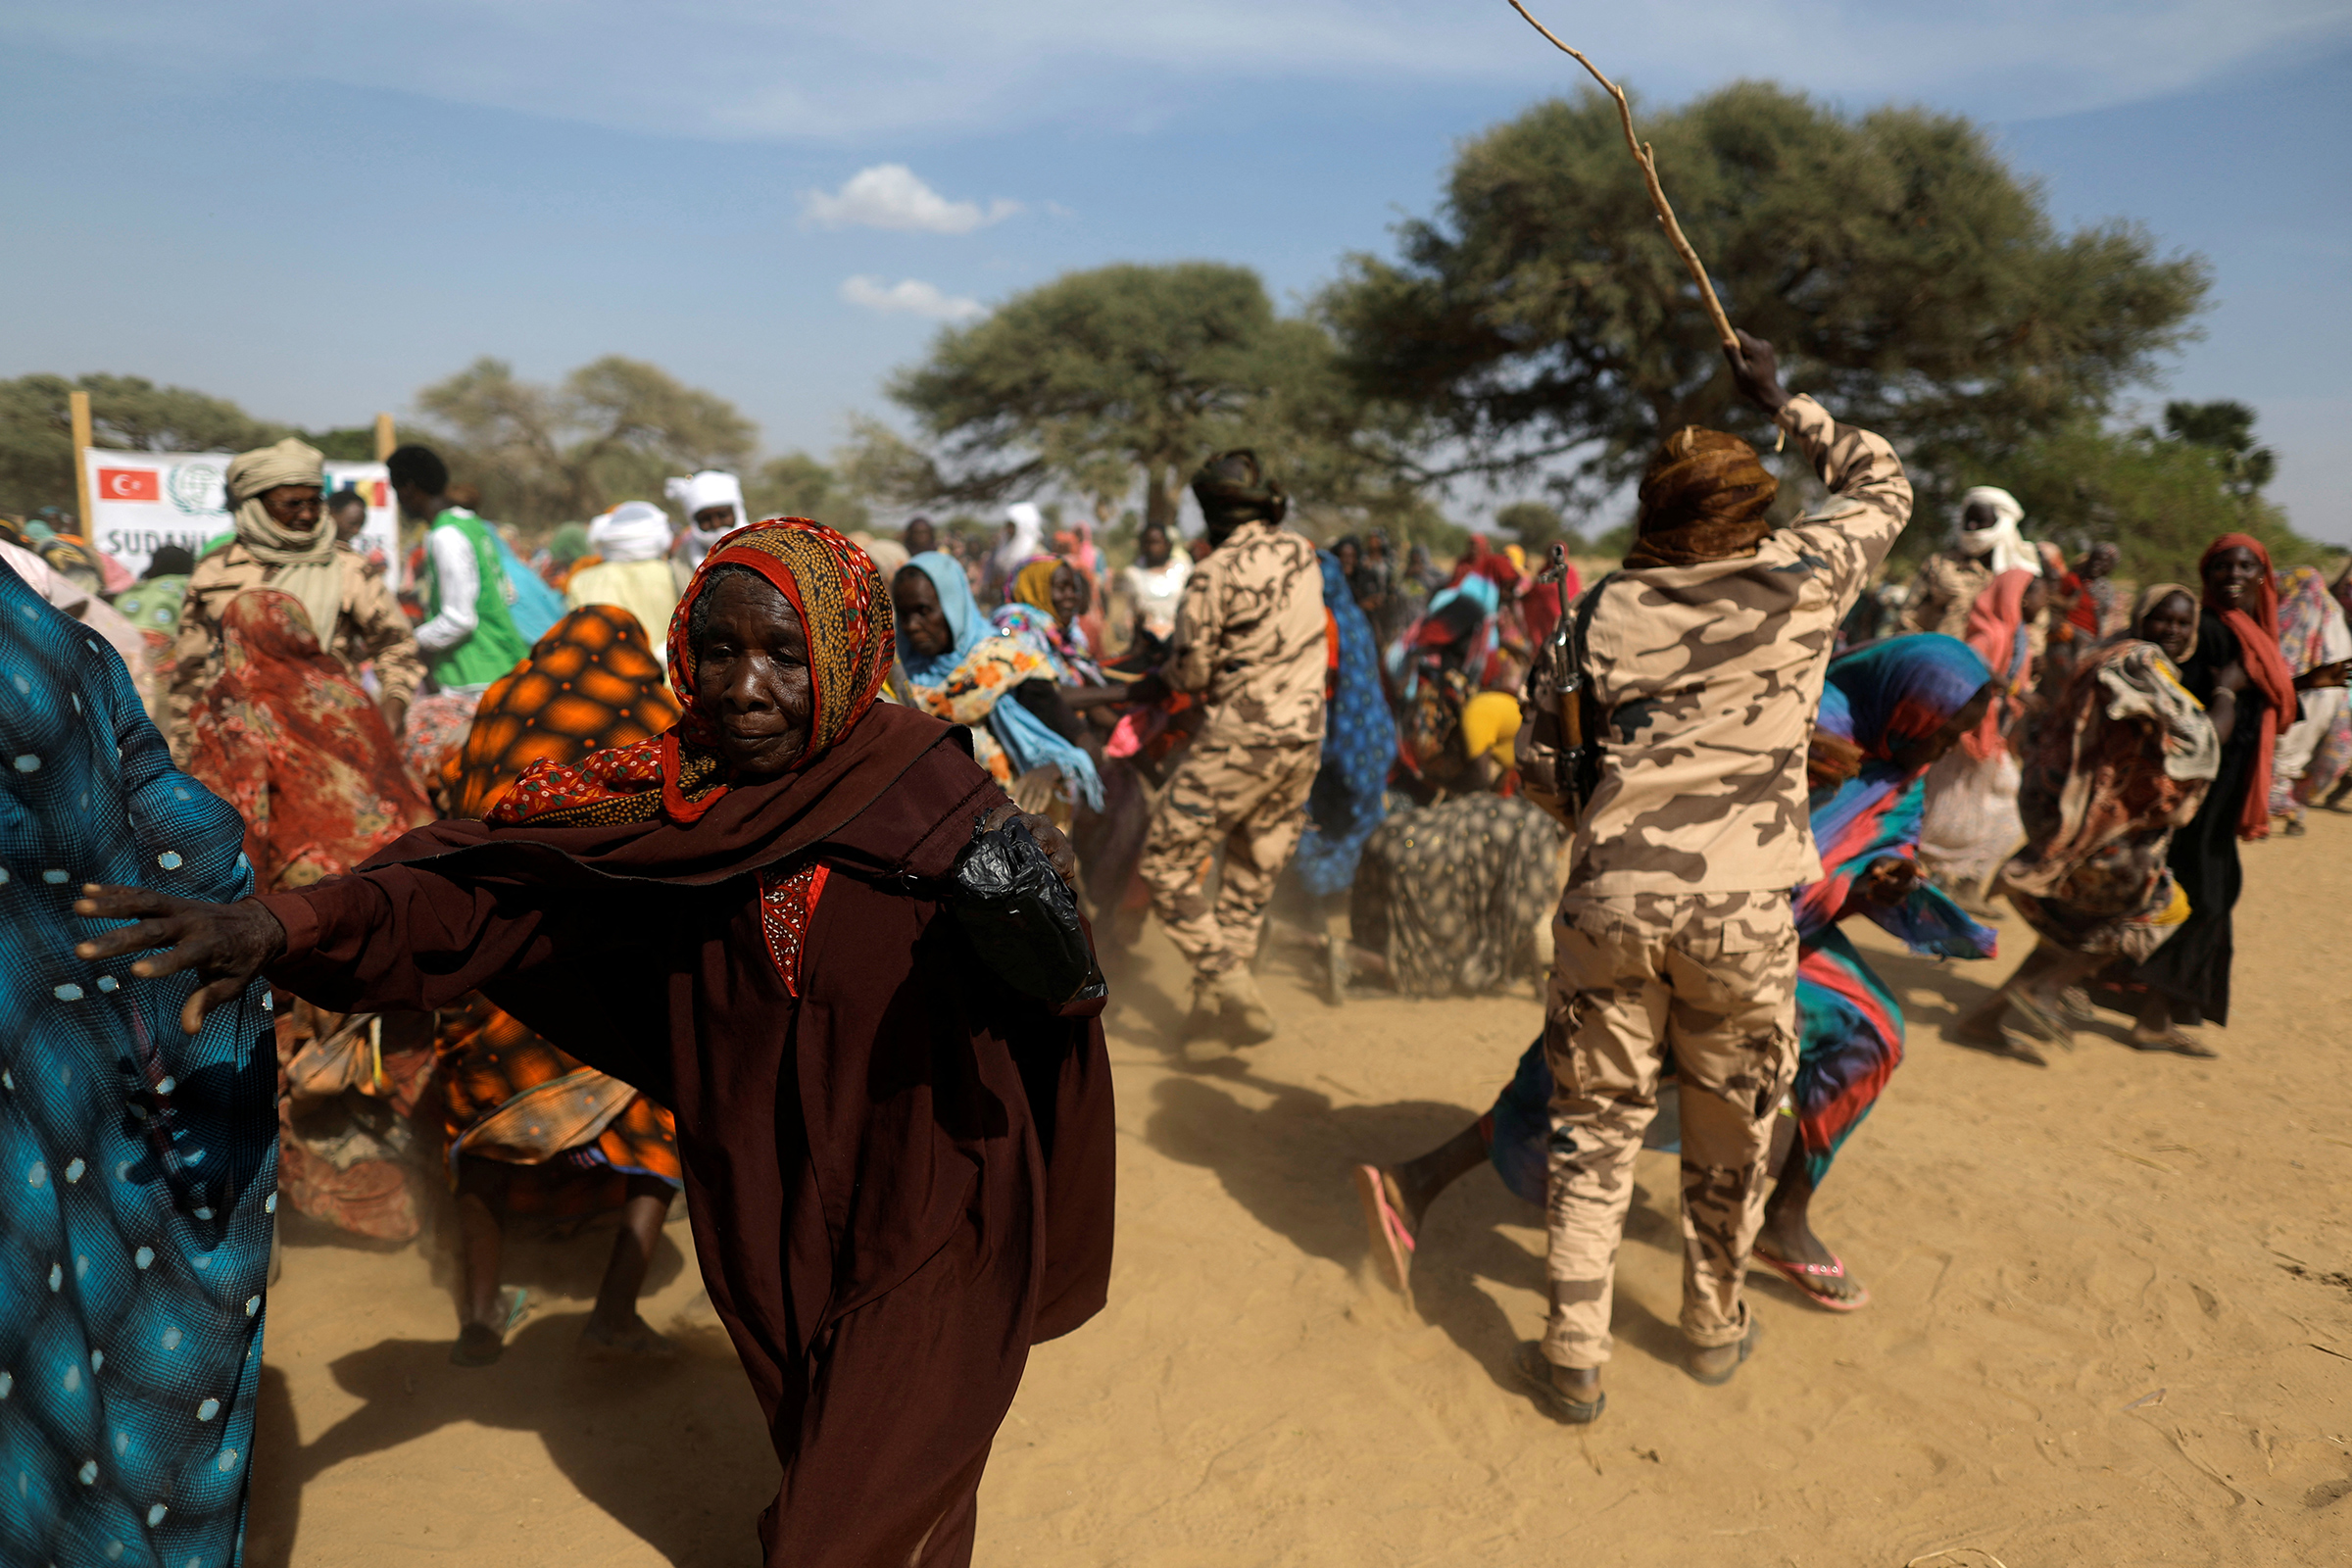 Sudanese refugees women, who fled the violence in their country and who were waiting desperately for food distribution, dodge the soldiers attempting to hold them back to grab bags of provision when they saw that supplies brought by a Turkish aid group (IHH) were running out, near the border between Sudan and Chad on May 7. (Zohra Bensemra—Reuters)